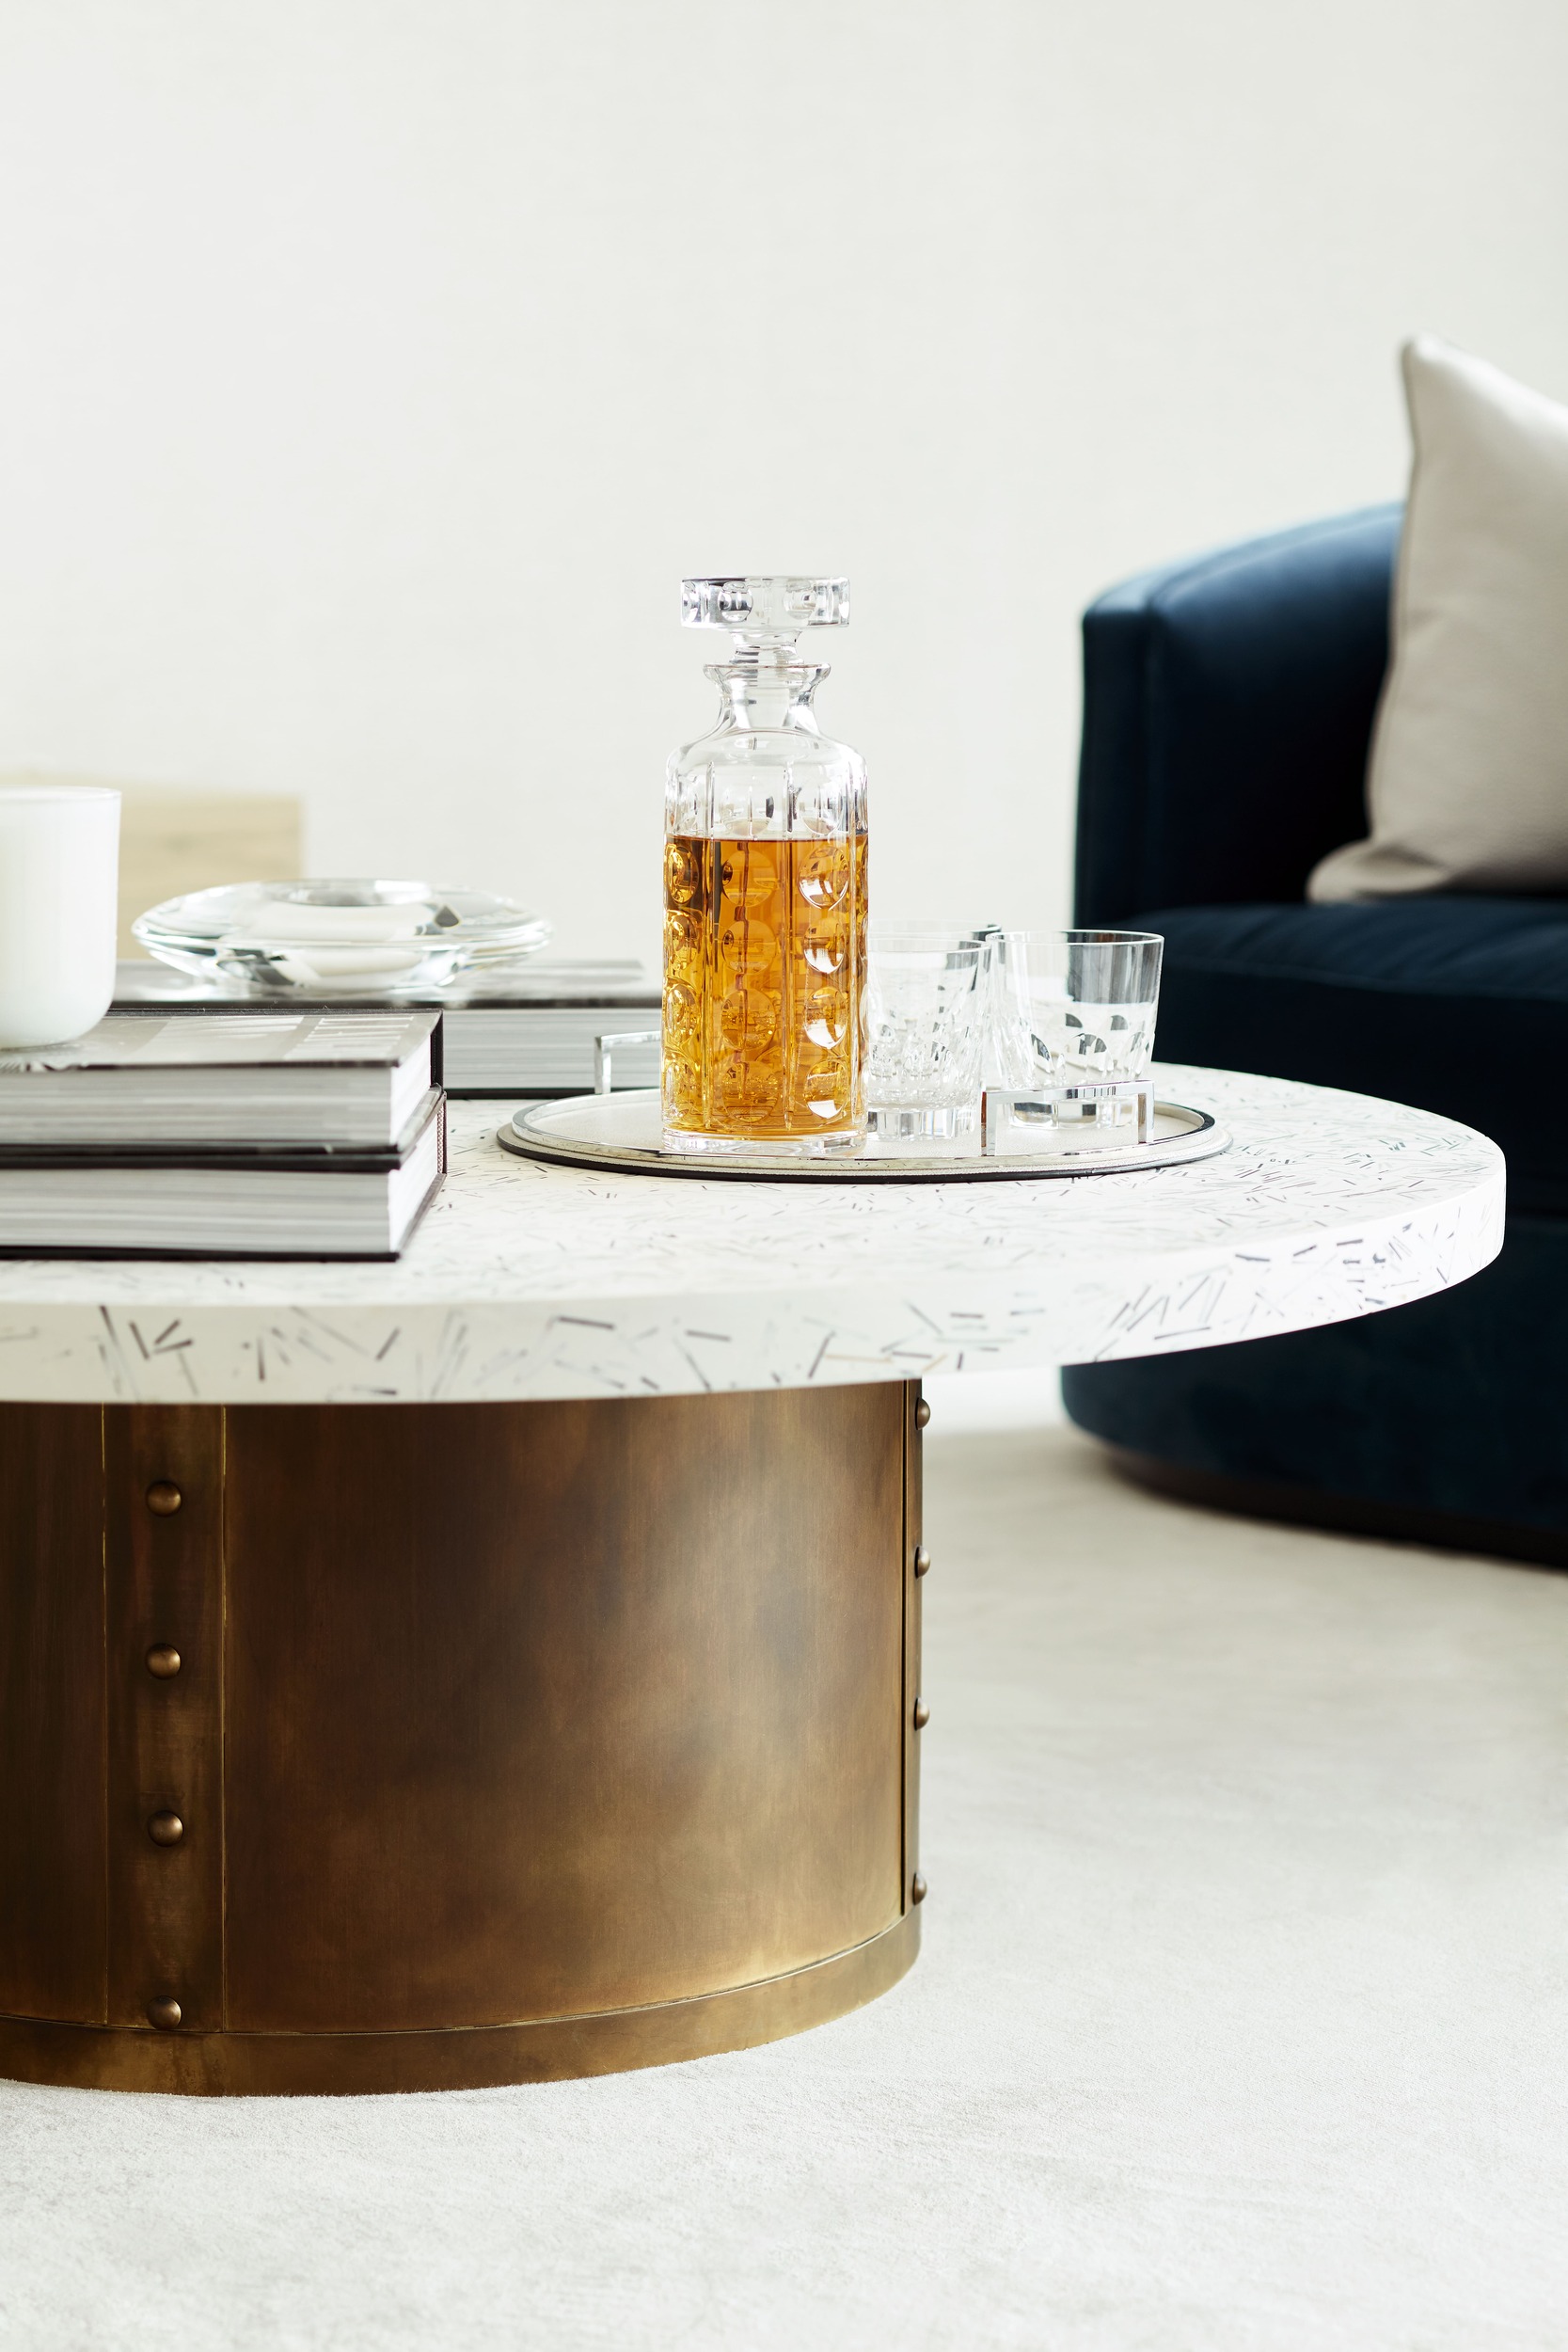 Round coffee table creates focal point to room